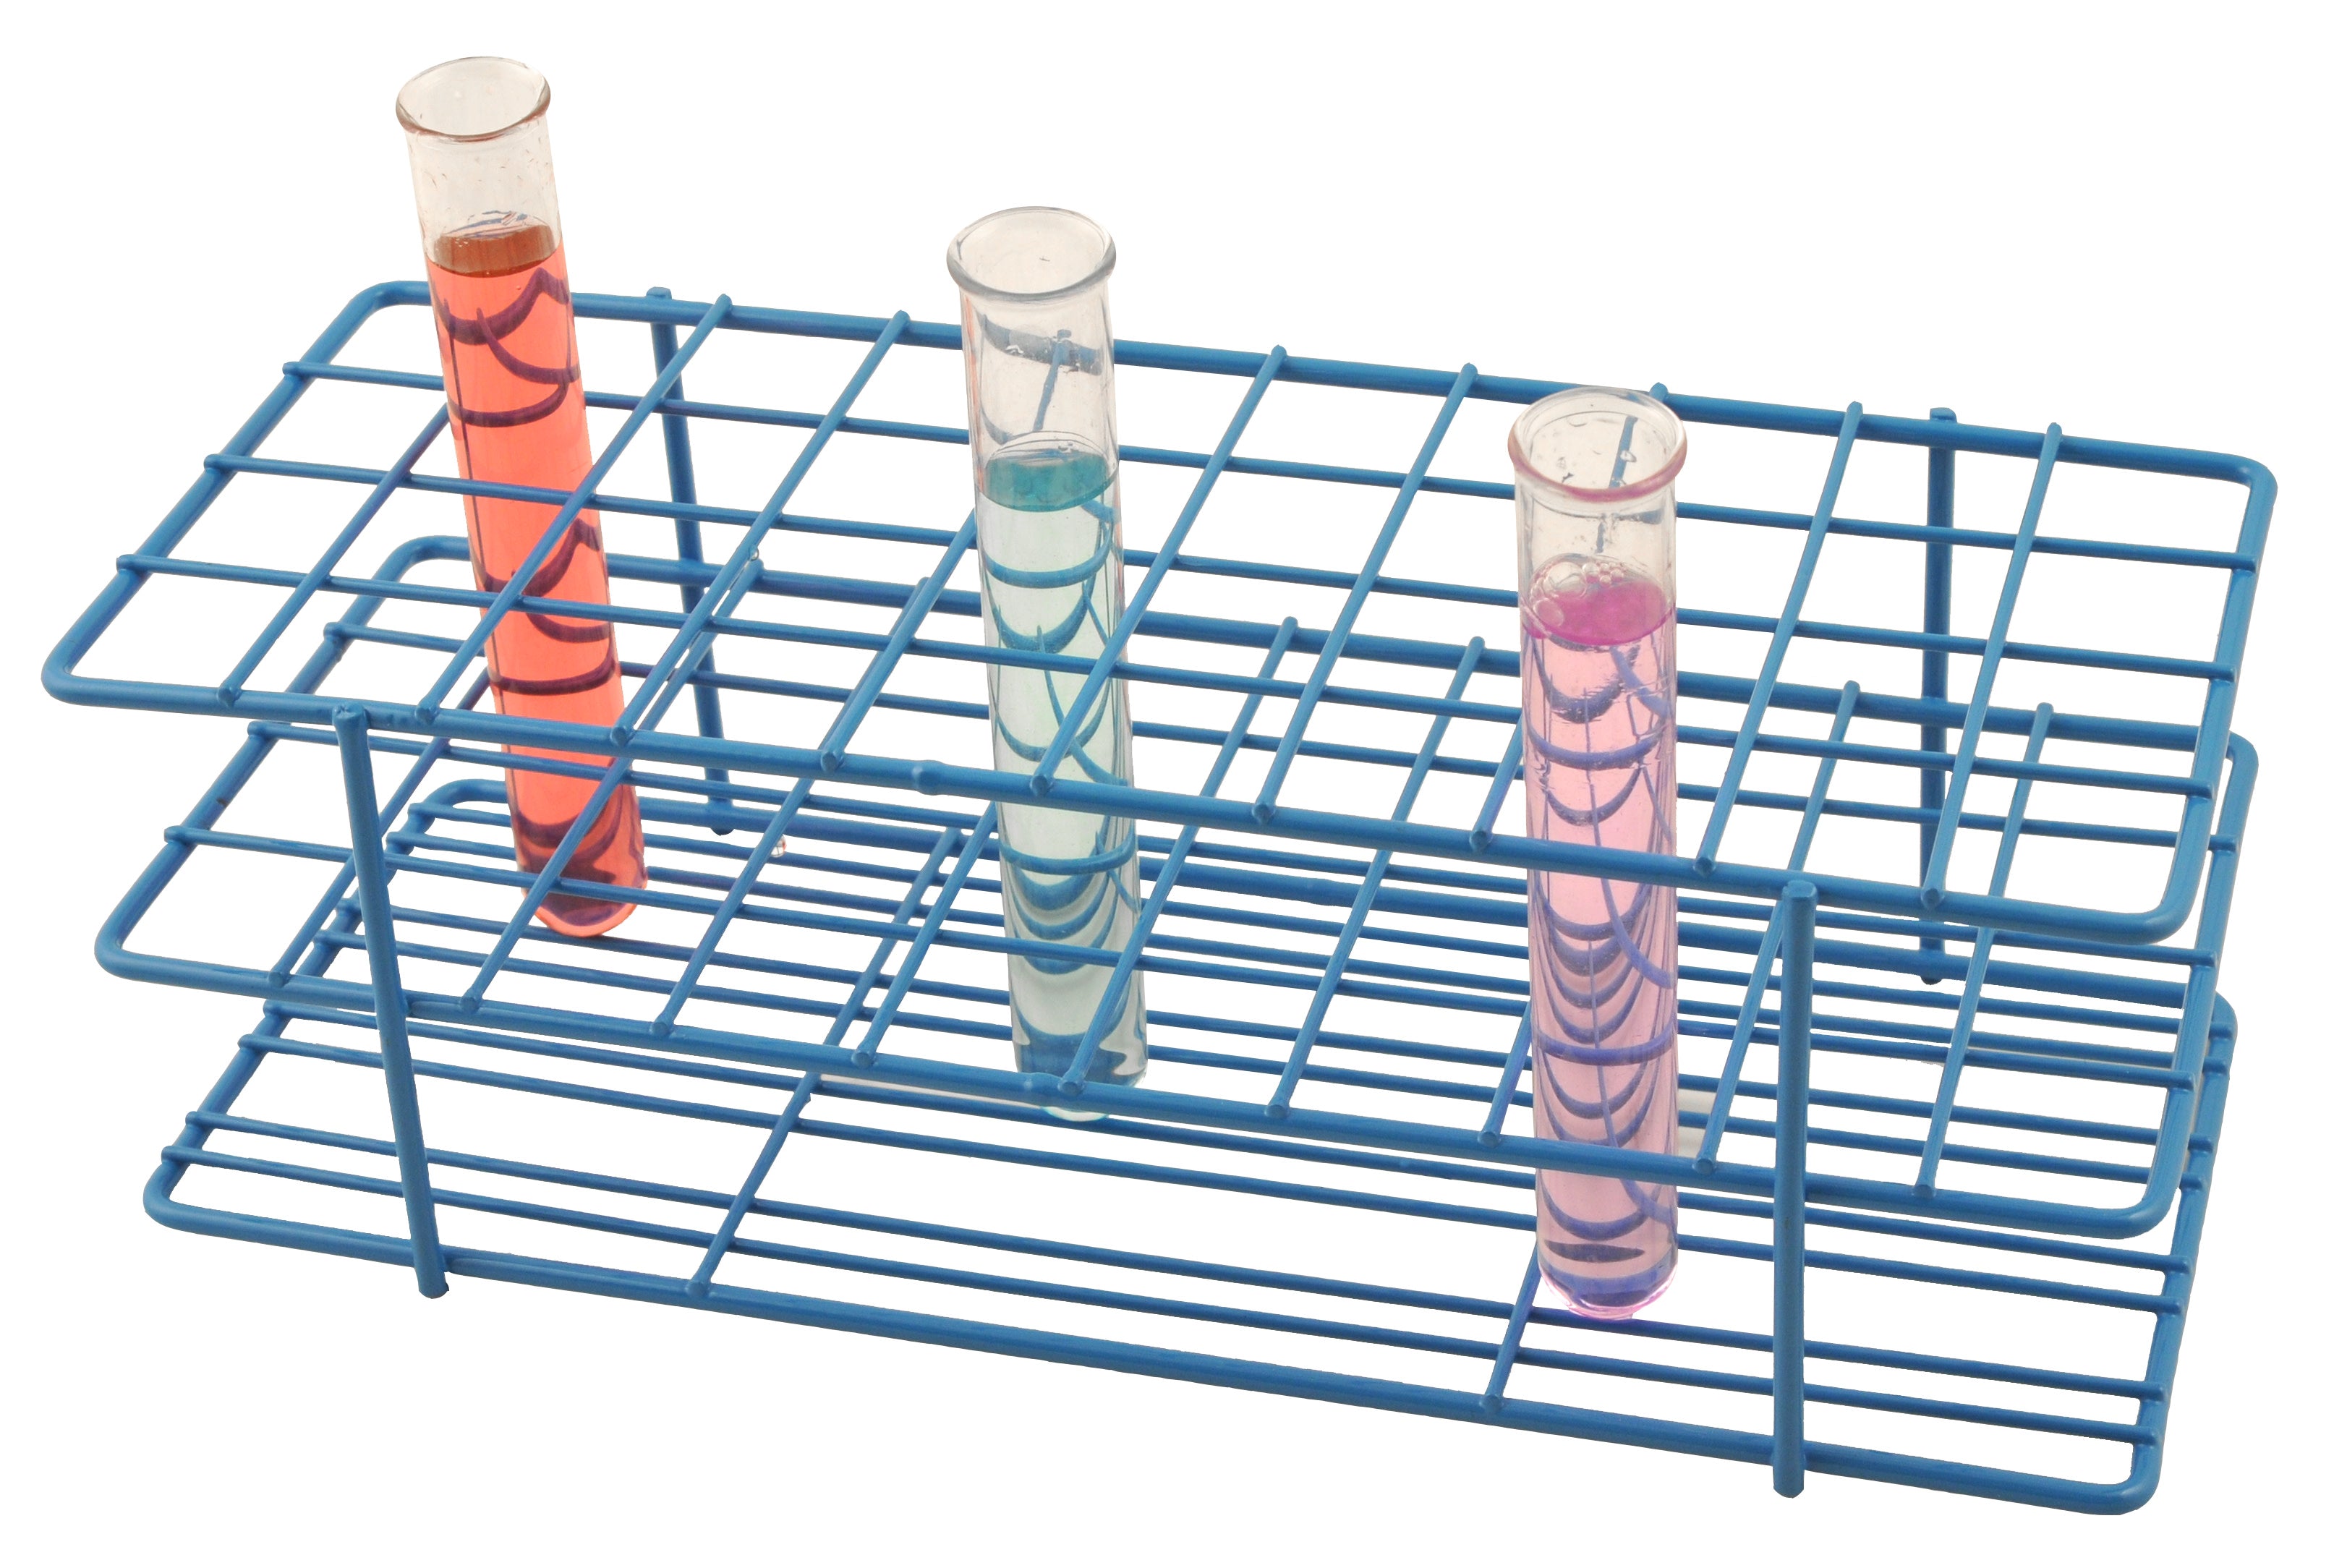 Blue Epoxy Coated Steel Wire Test Tube Rack, 40 Tubes (20-22mm), 4 X 10 Format